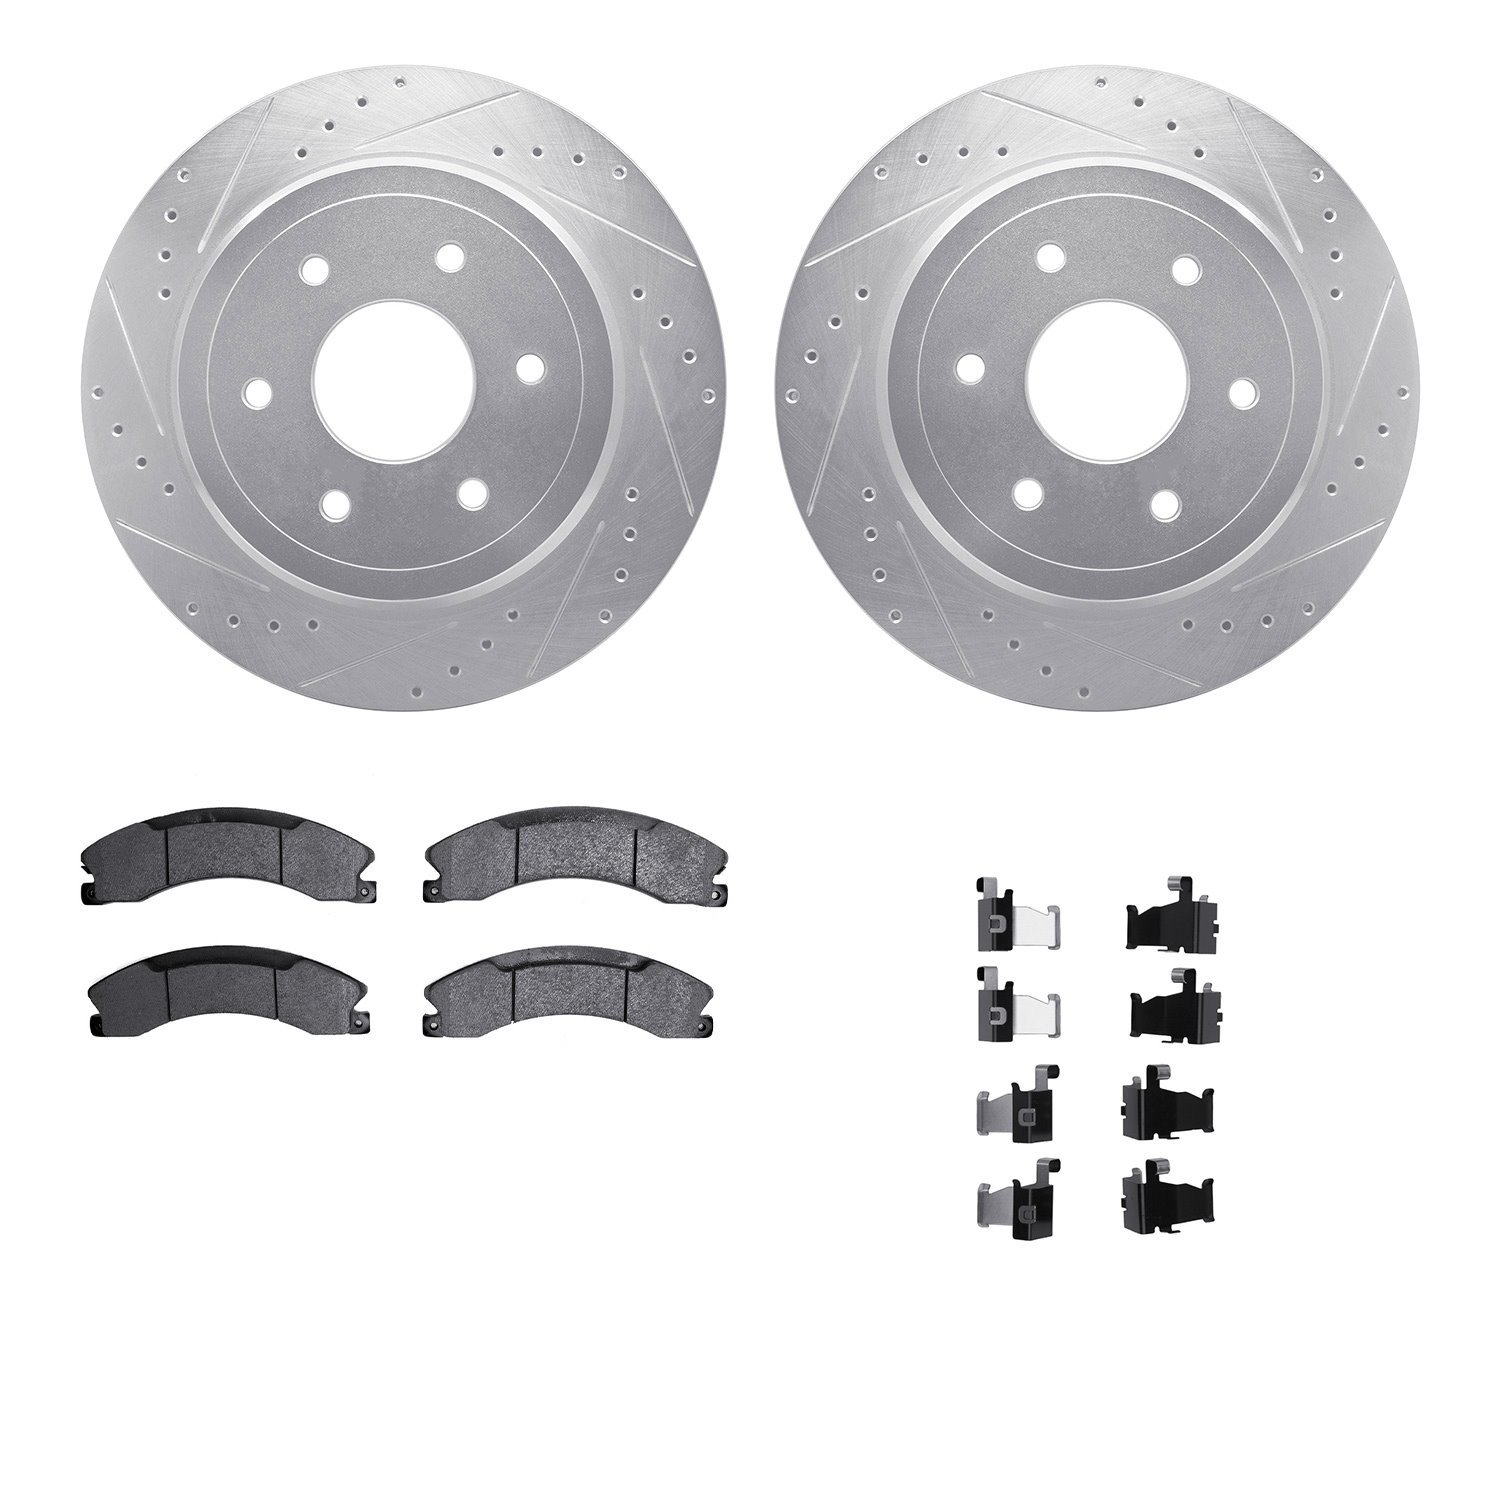 7412-67009 Drilled/Slotted Brake Rotors with Ultimate-Duty Brake Pads Kit & Hardware [Silver], Fits Select Infiniti/Nissan, Posi